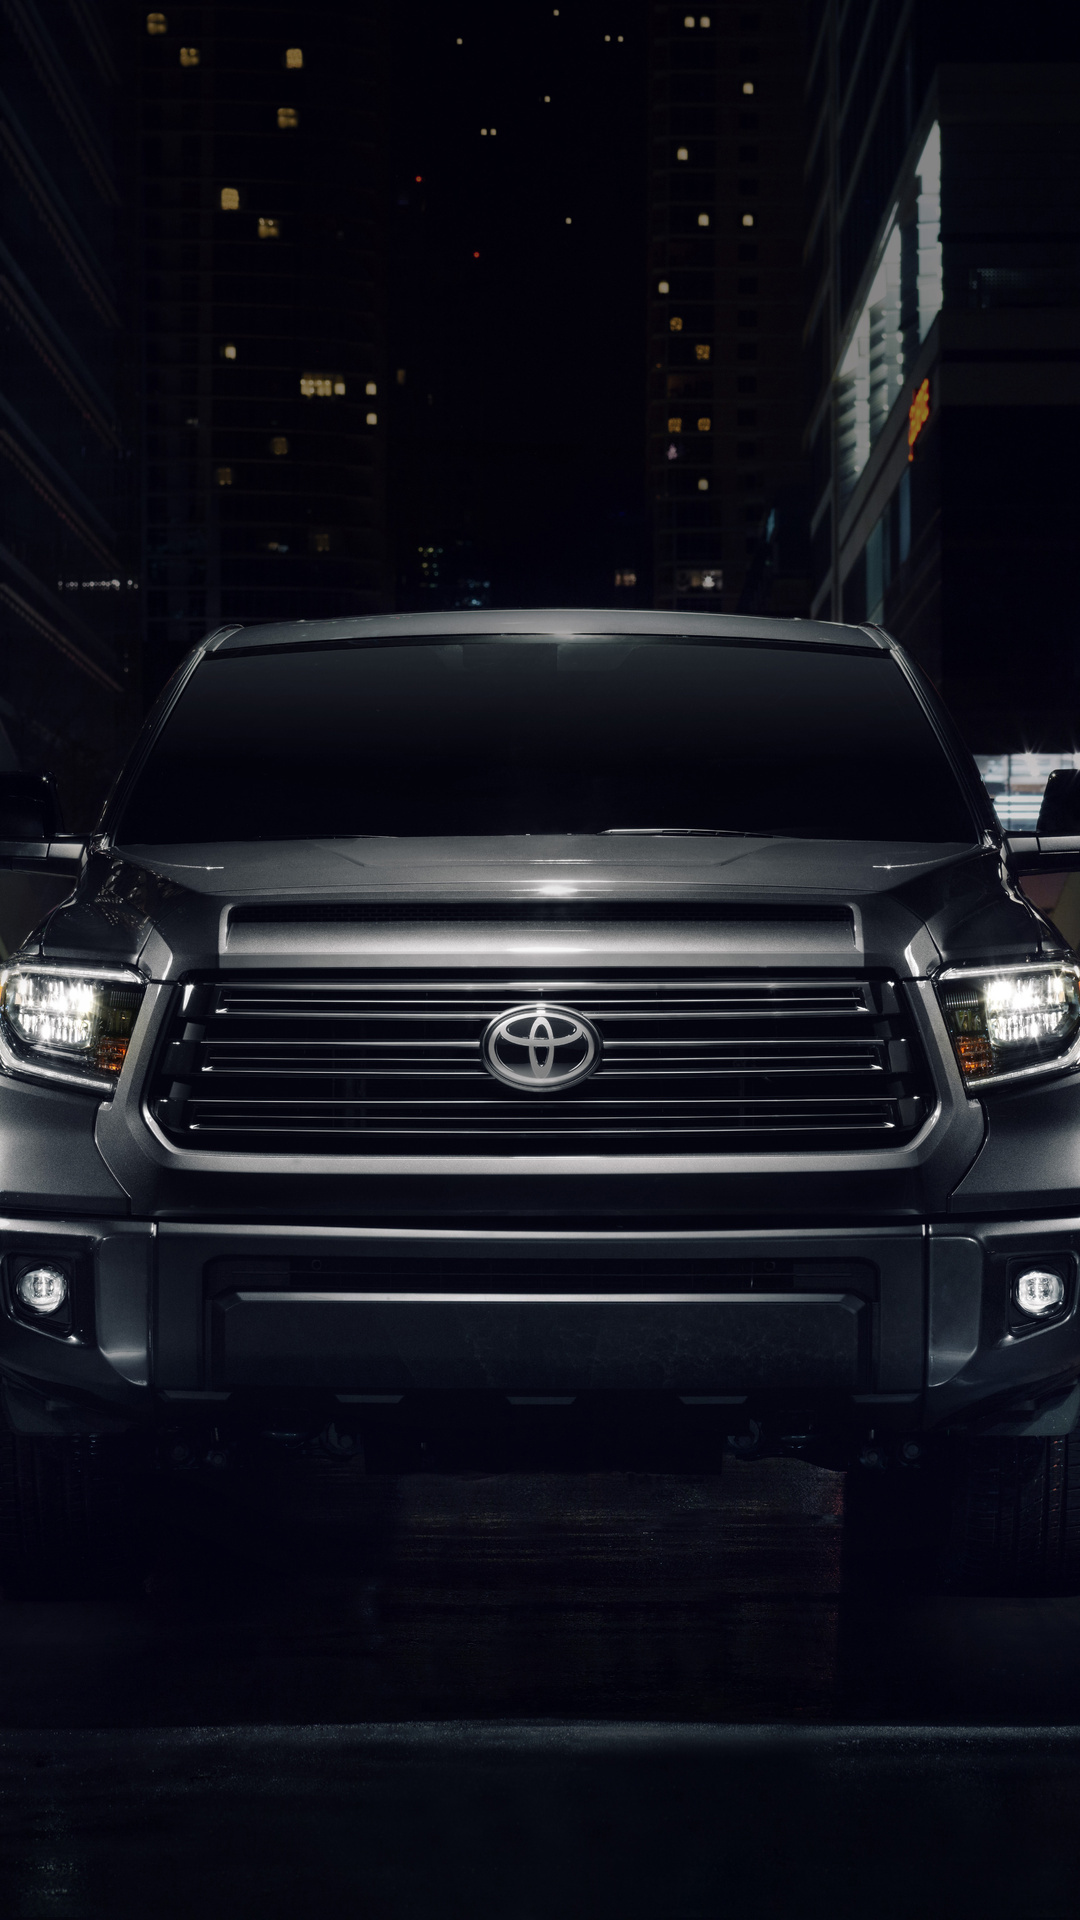 Toyota Tundra, Nightshade edition, Crewmax cab, High-quality images, 1080x1920 Full HD Handy